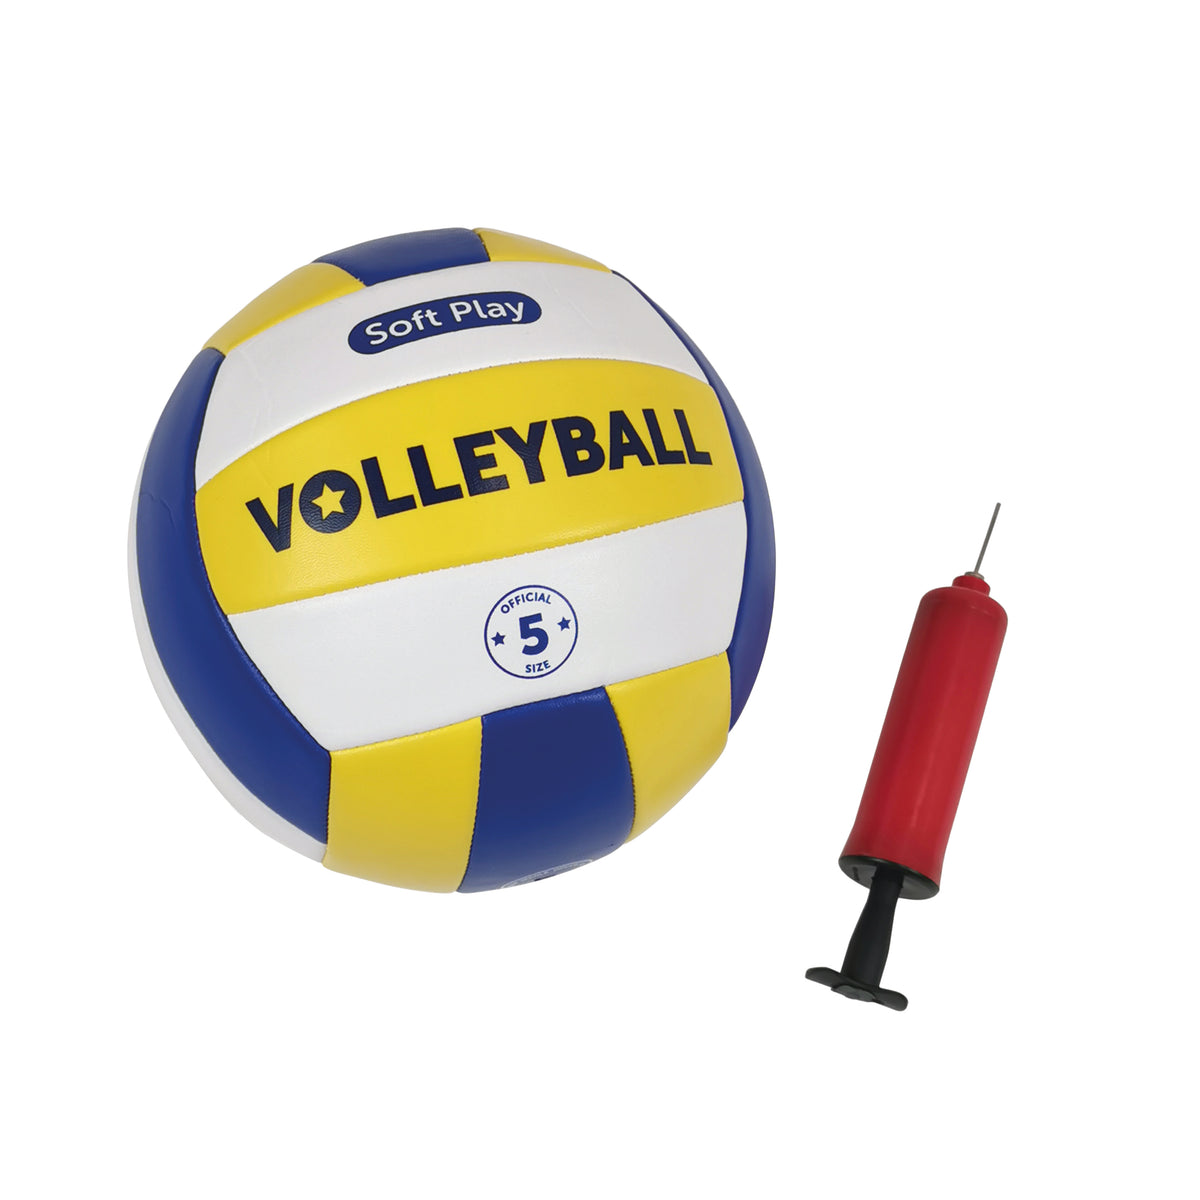 Volleyball Set with 3m Net